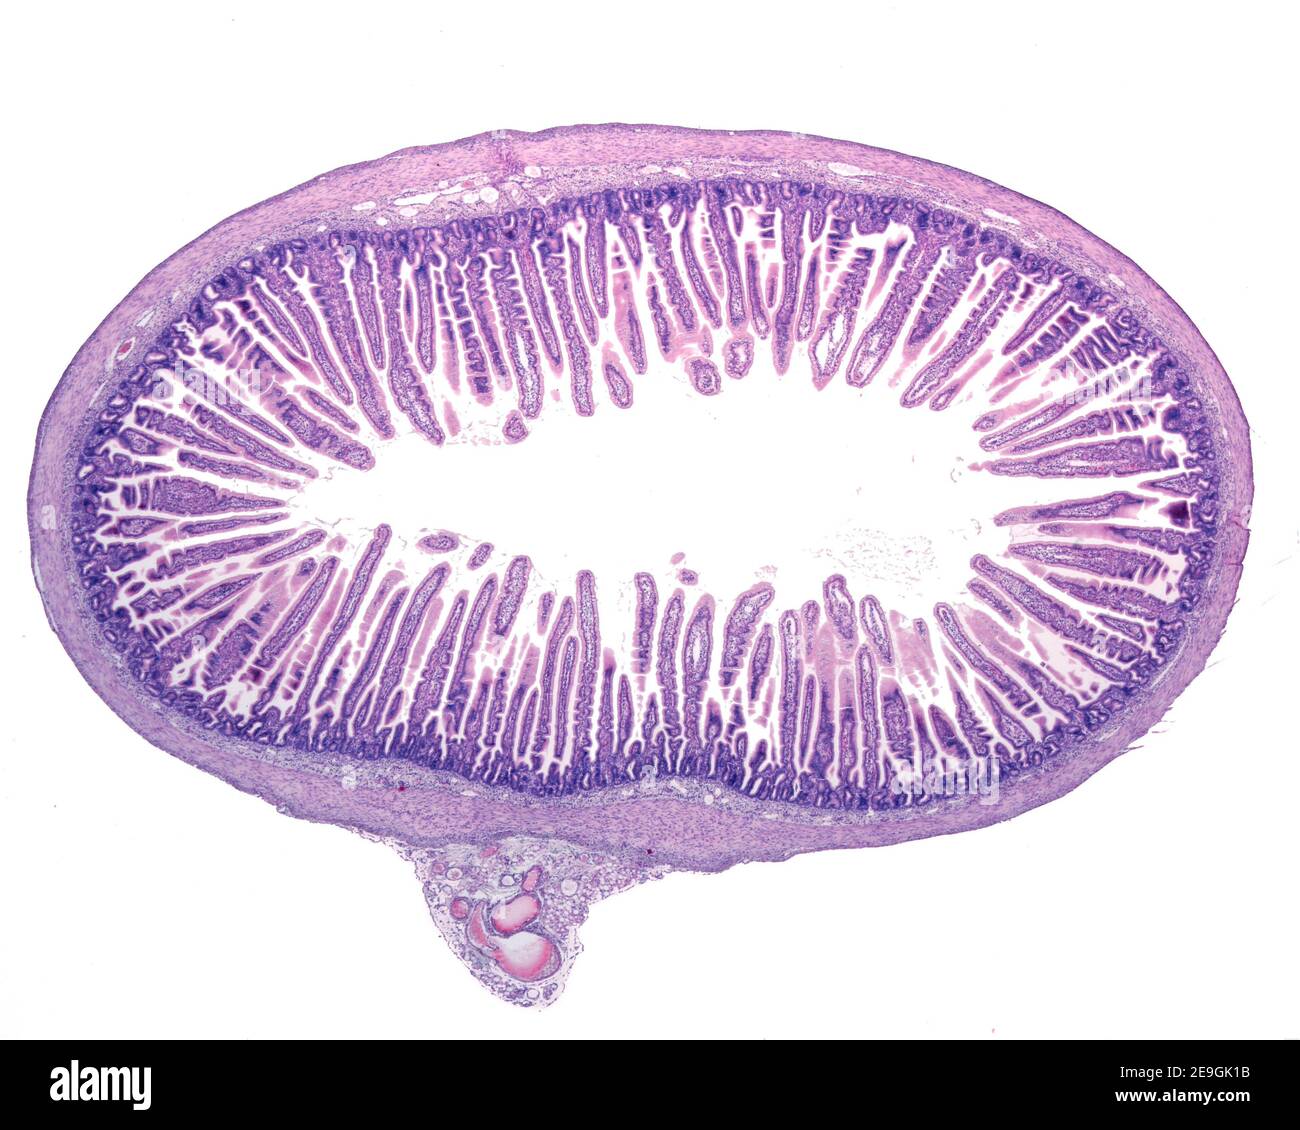 Cross section of a small intestine. The most prominent feature of the mucosal layer is the abundance of villi extending into the lumen. Stock Photo